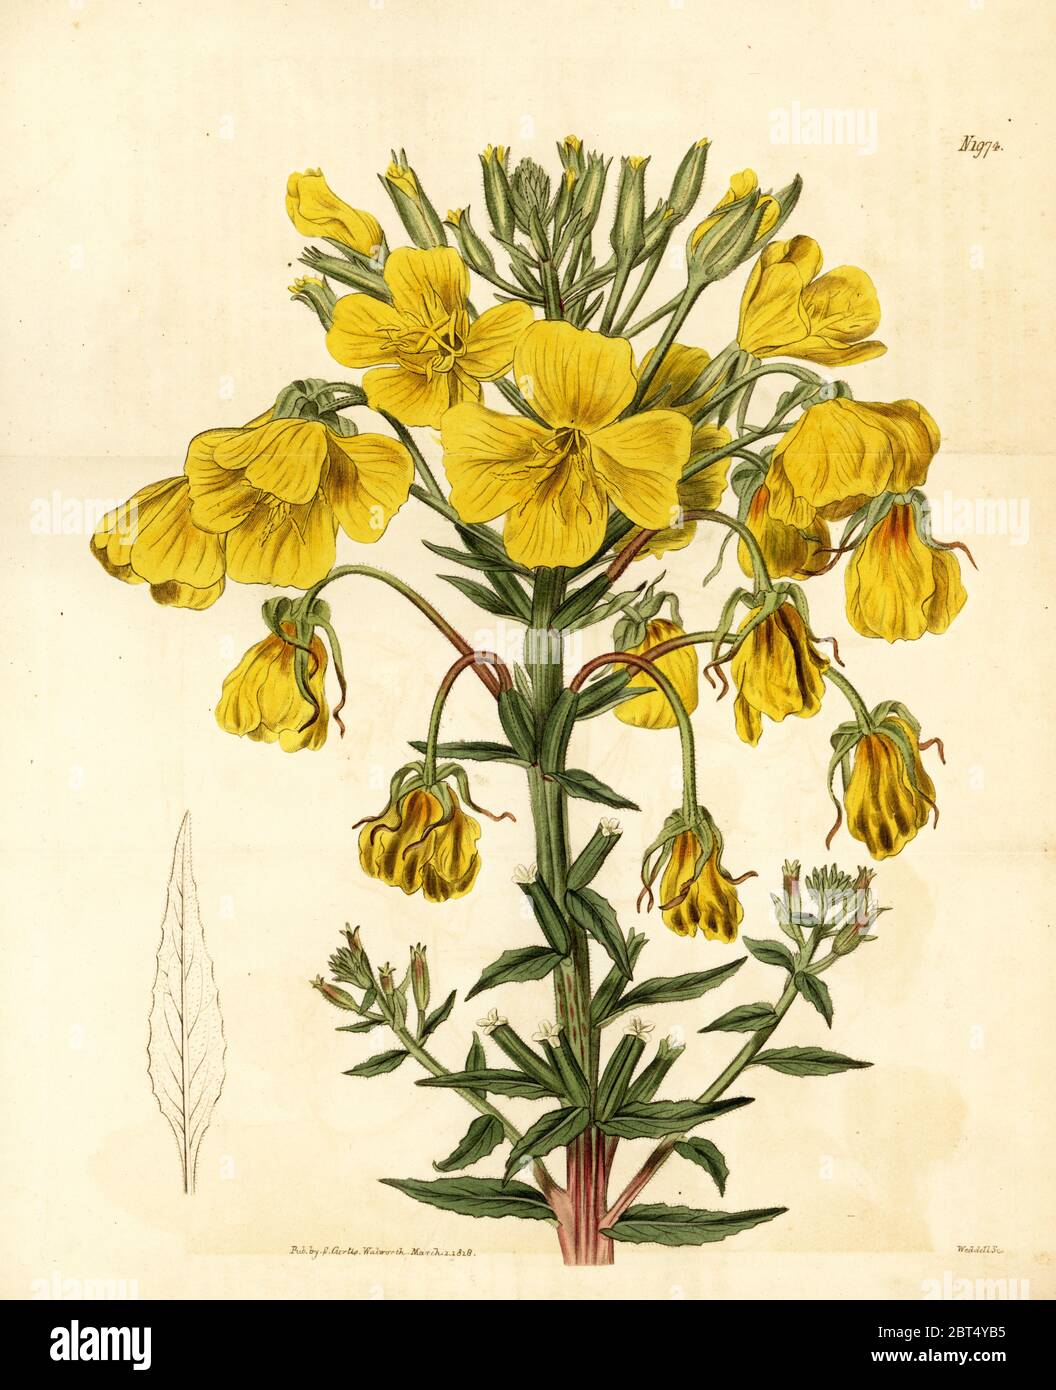 Evening primrose or suncup, Oenothera corymbosa. Handcoloured copperplate engraving by Weddell from Samuel Curtis' Botanical Magazine, London, 1818. Stock Photo